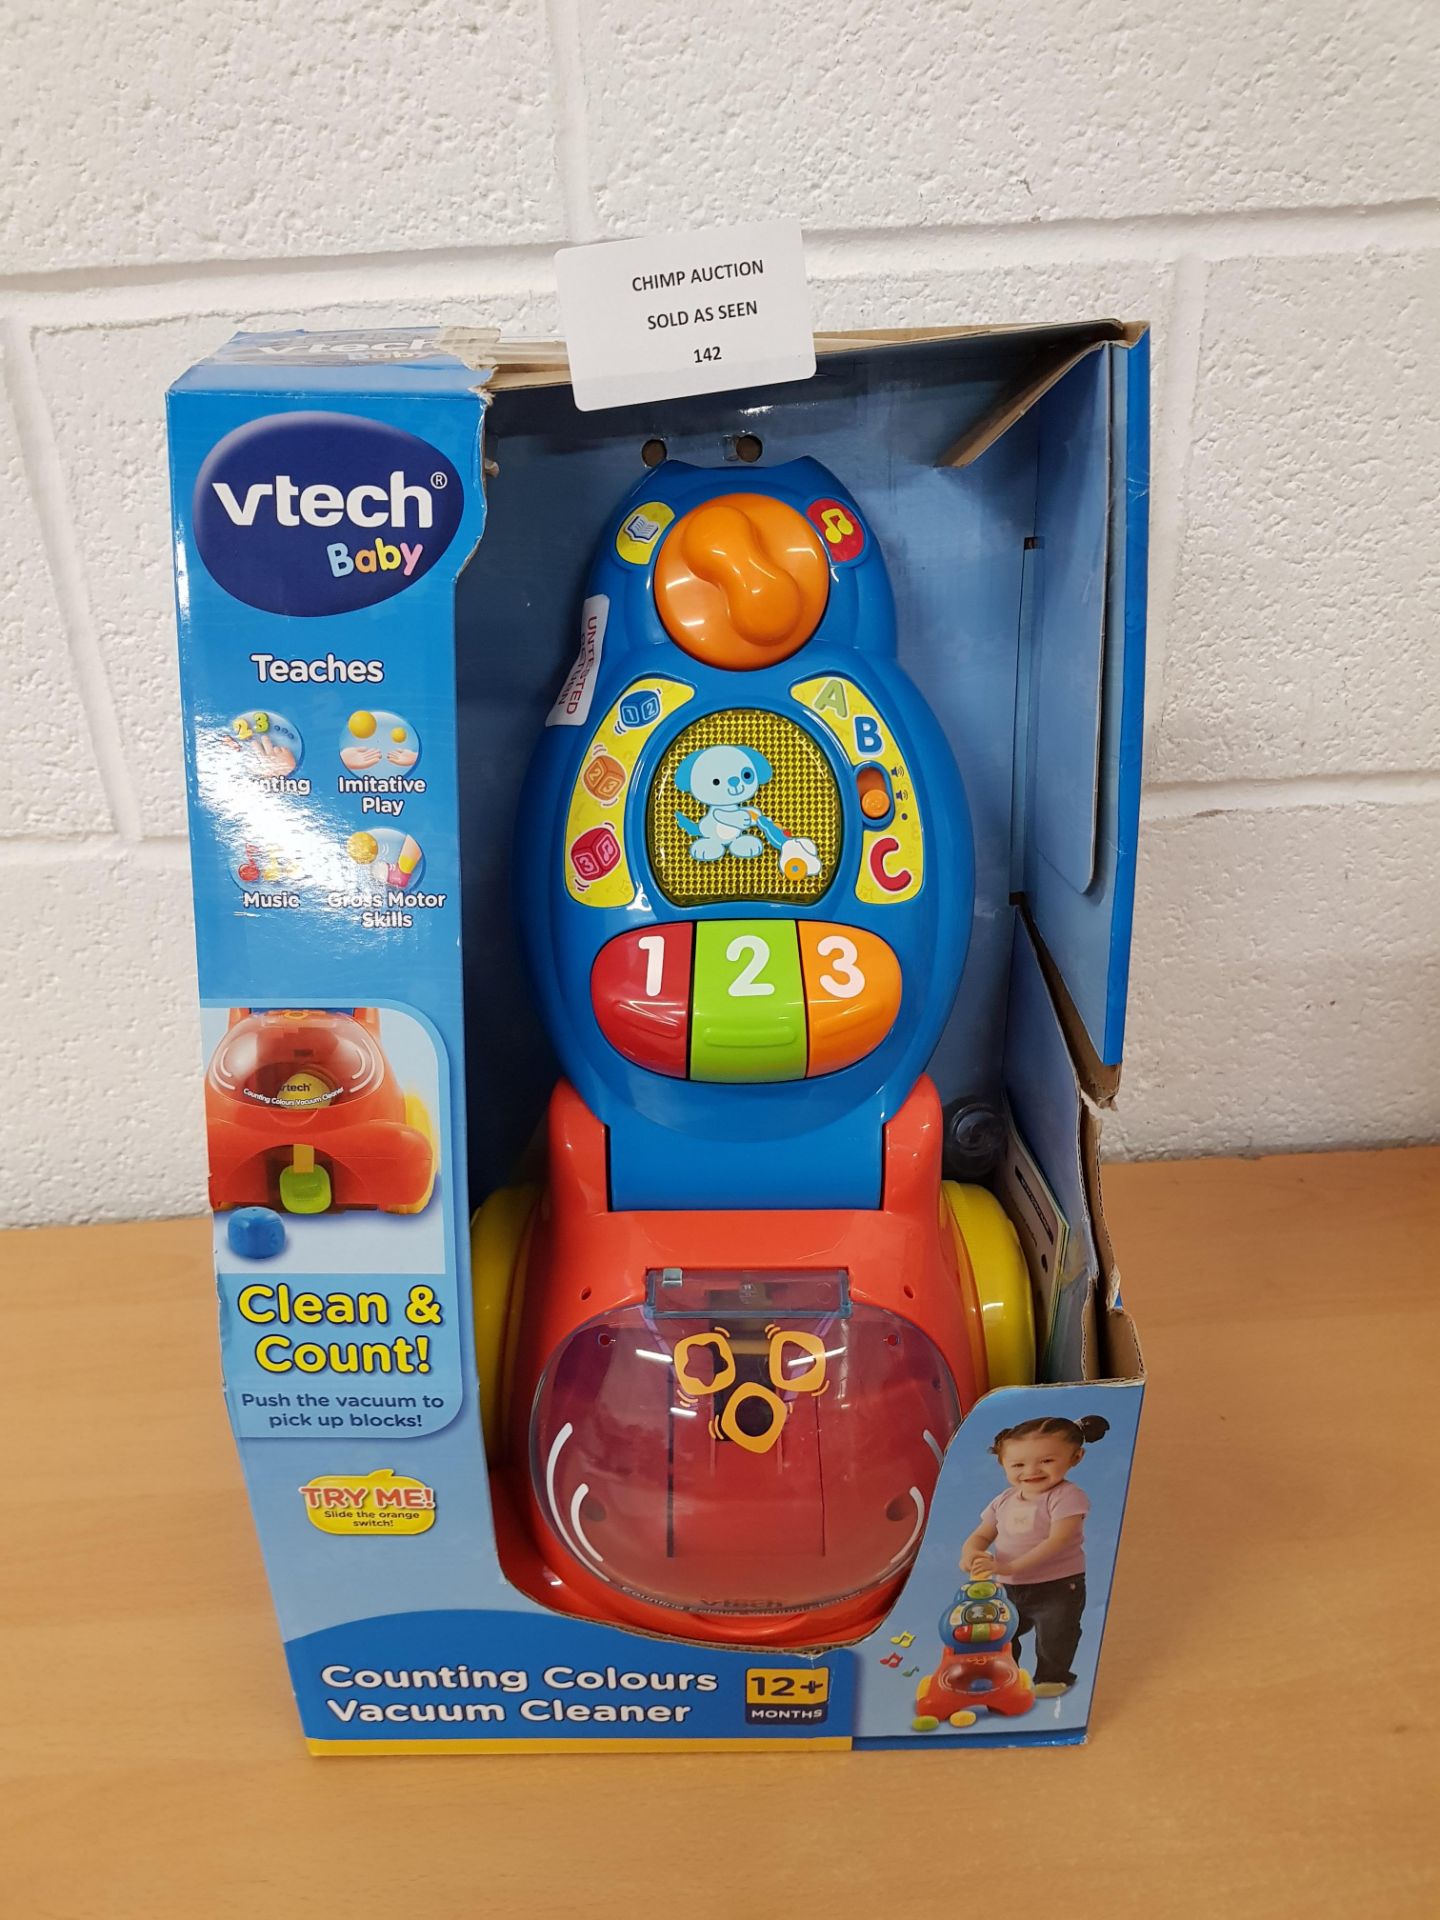 Vtech Baby Counting vacuum cleaner